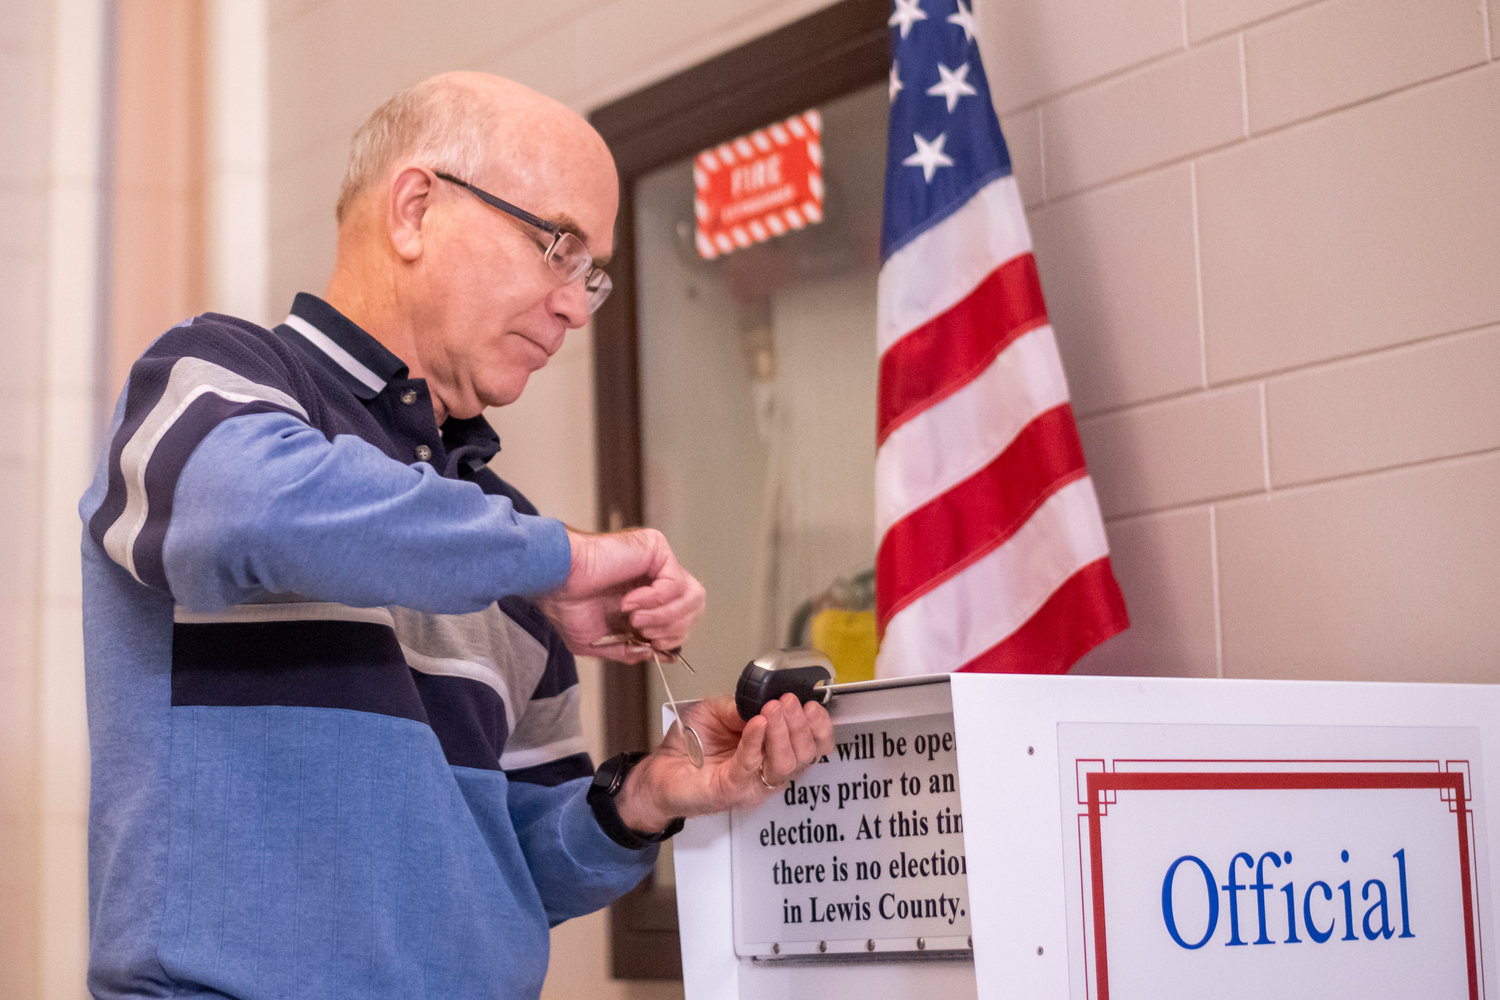 Lewis County Auditor Larry Grove locks up an official ballot box in this Chronicle file photo.